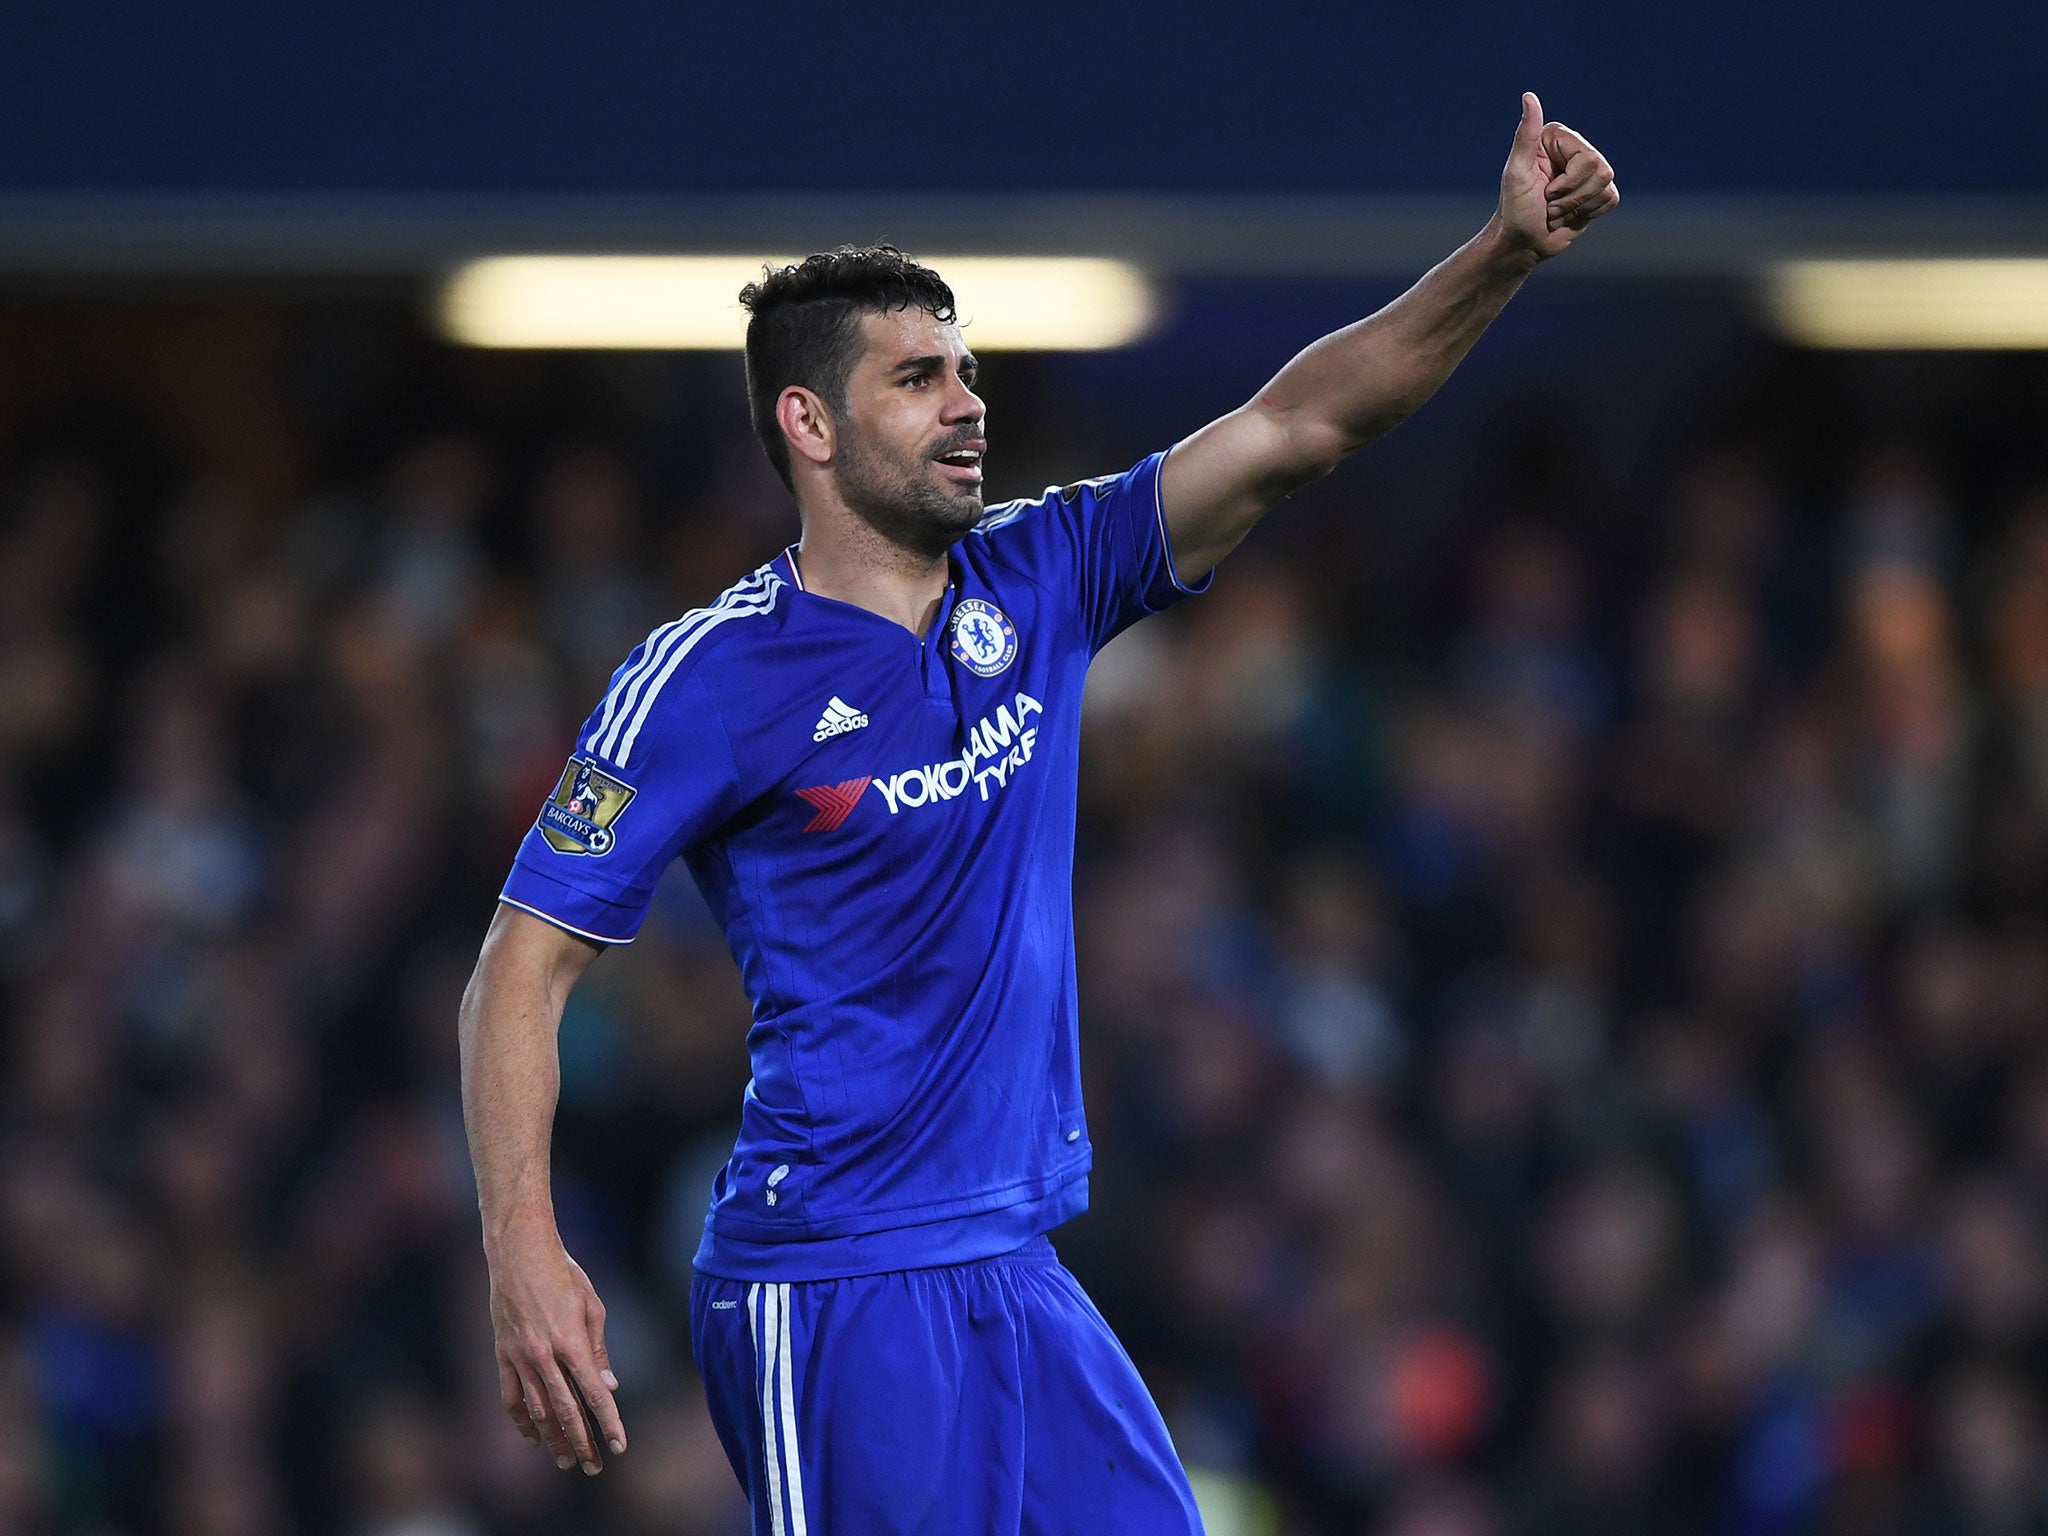 Could Costa's time at Chelsea be coming to an end?